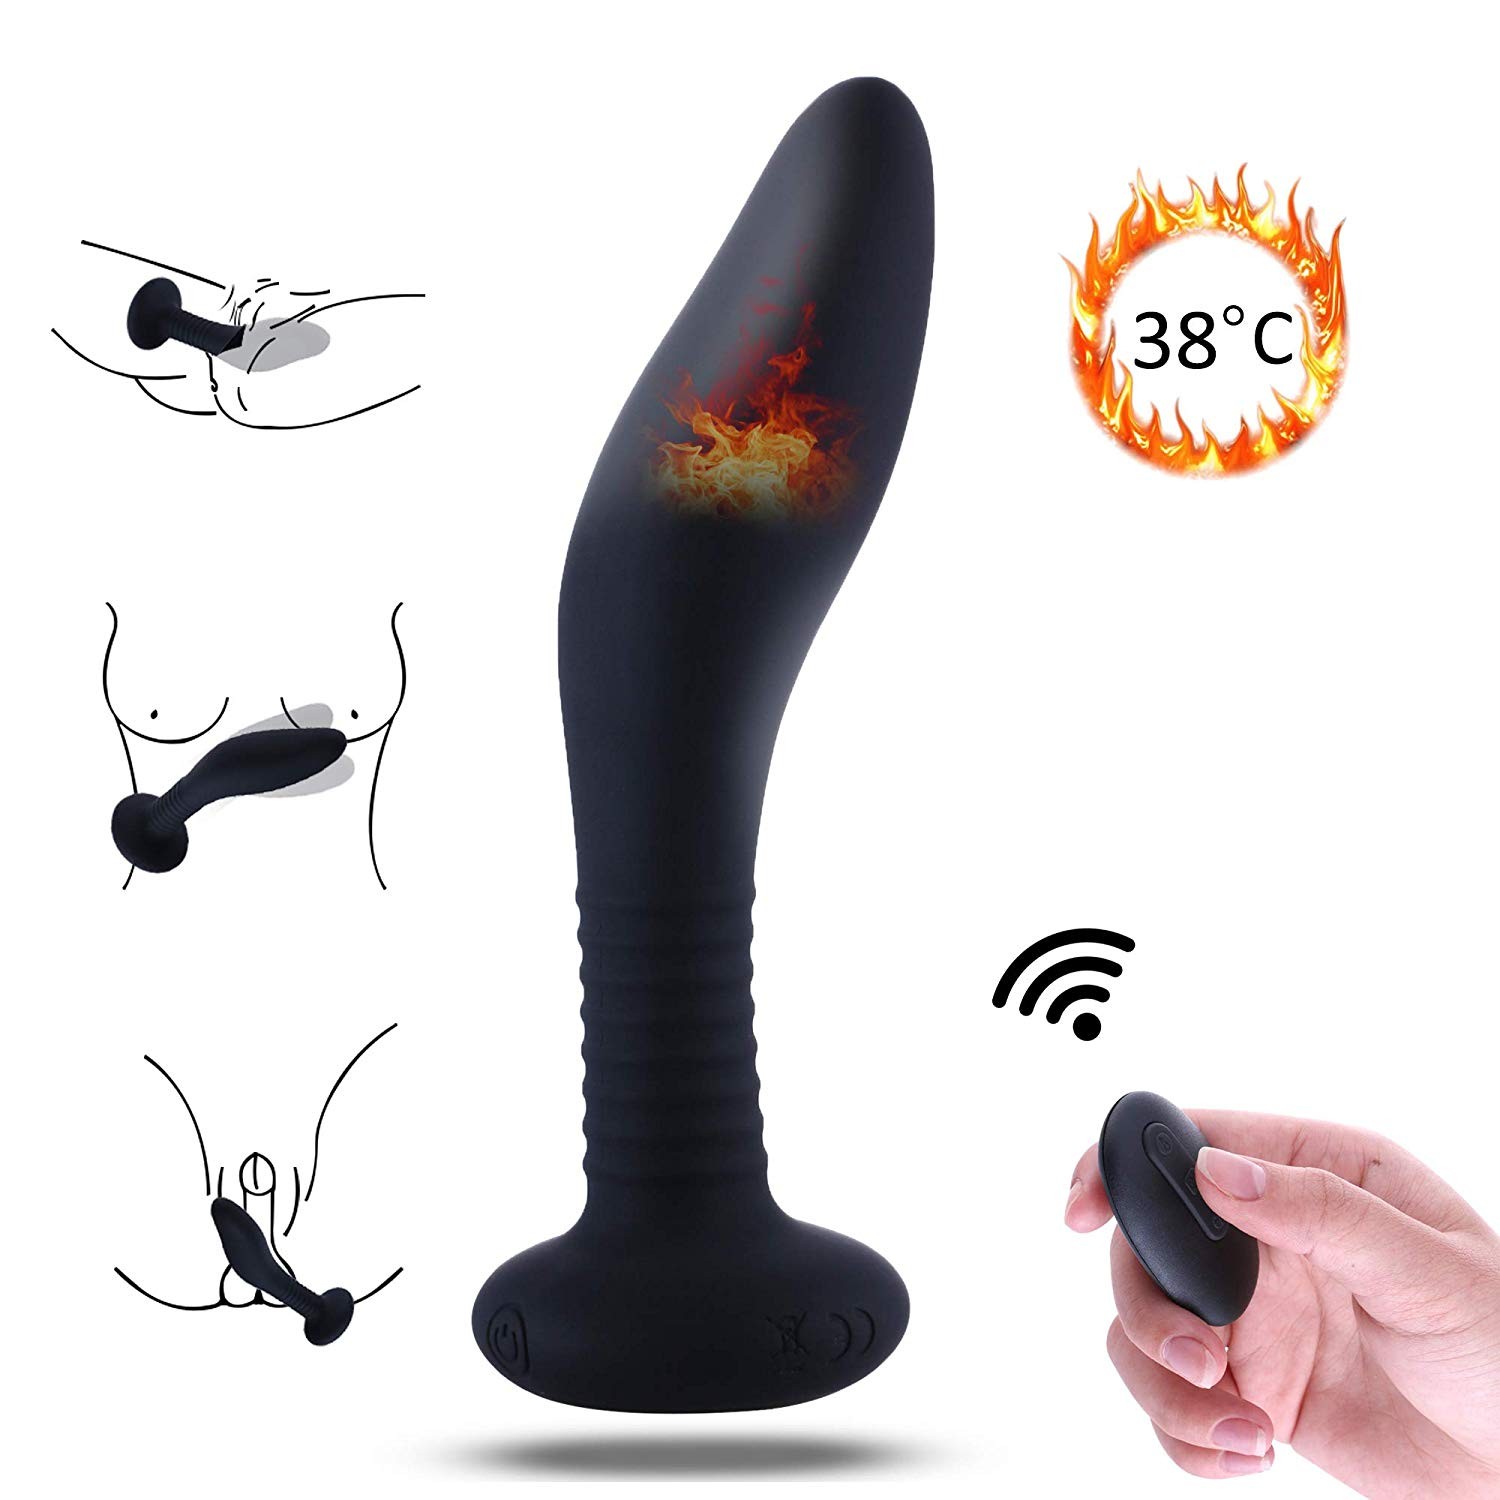 Male Vibrating Prostate Massager with Powerful Motors and 5 Frequency